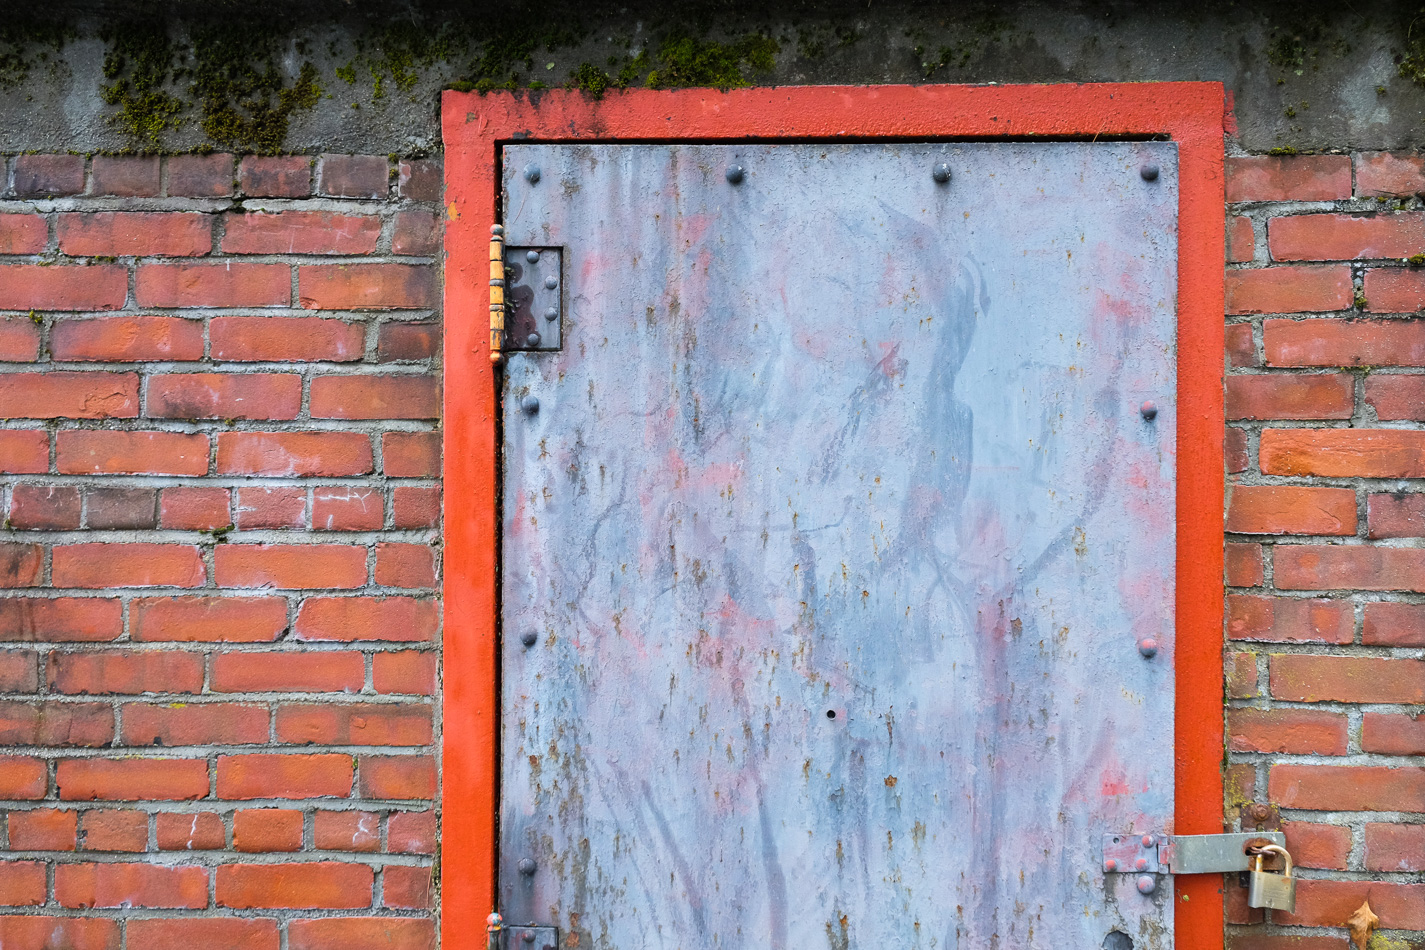 Color photo of a red door frame on a brick building